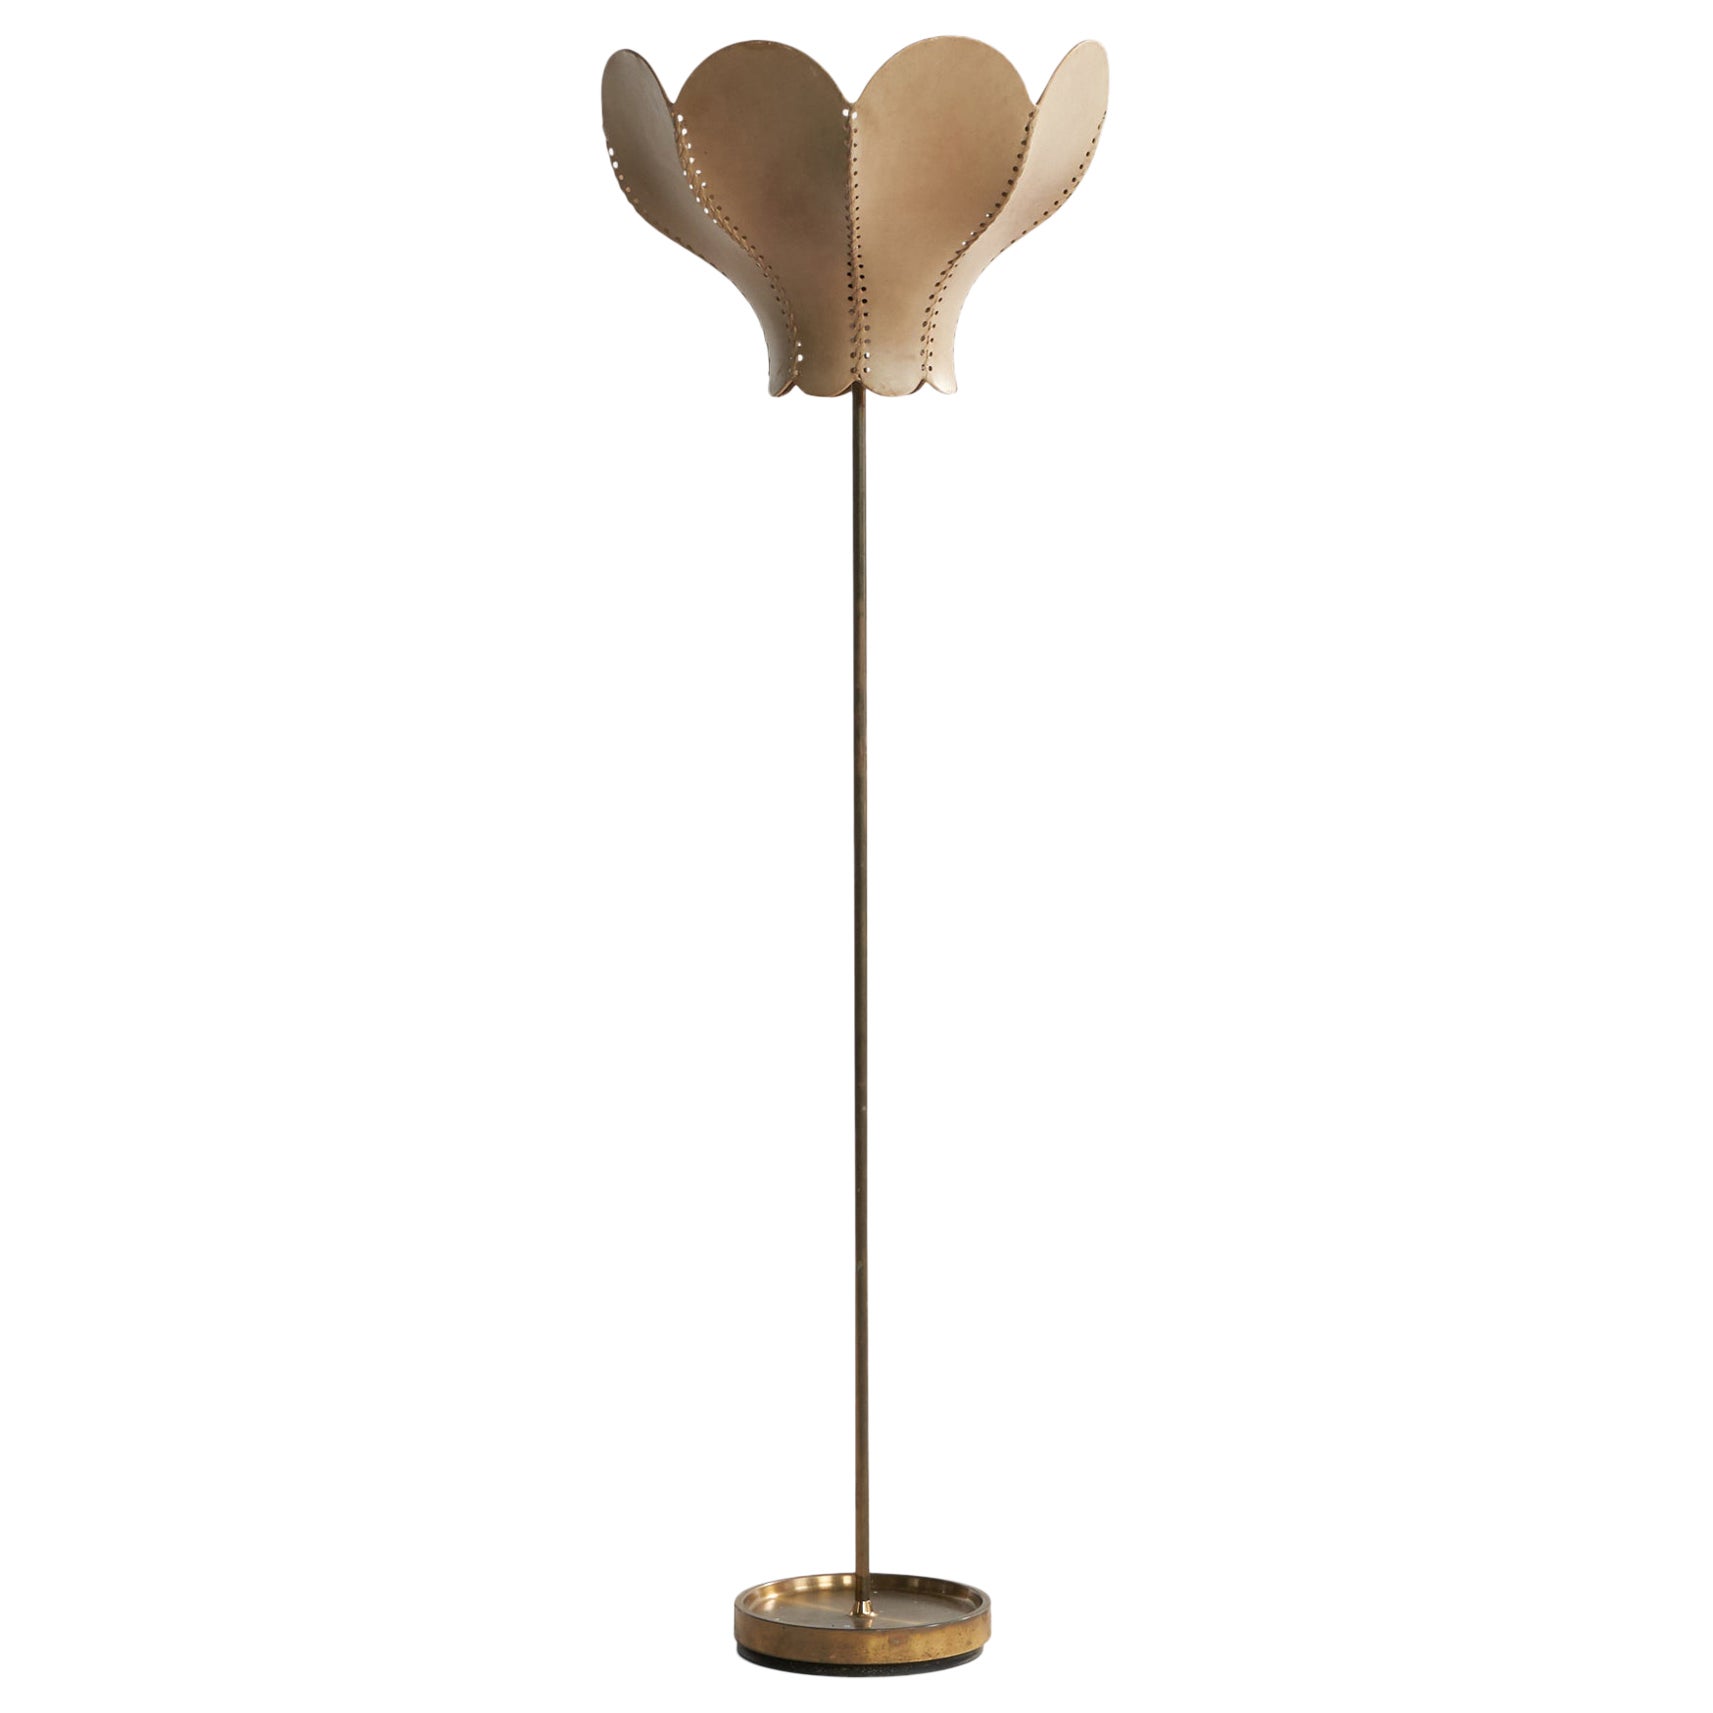 Fagerhults Belysning, Floor Lamp, Brass, Leather, Sweden, 1960s For Sale